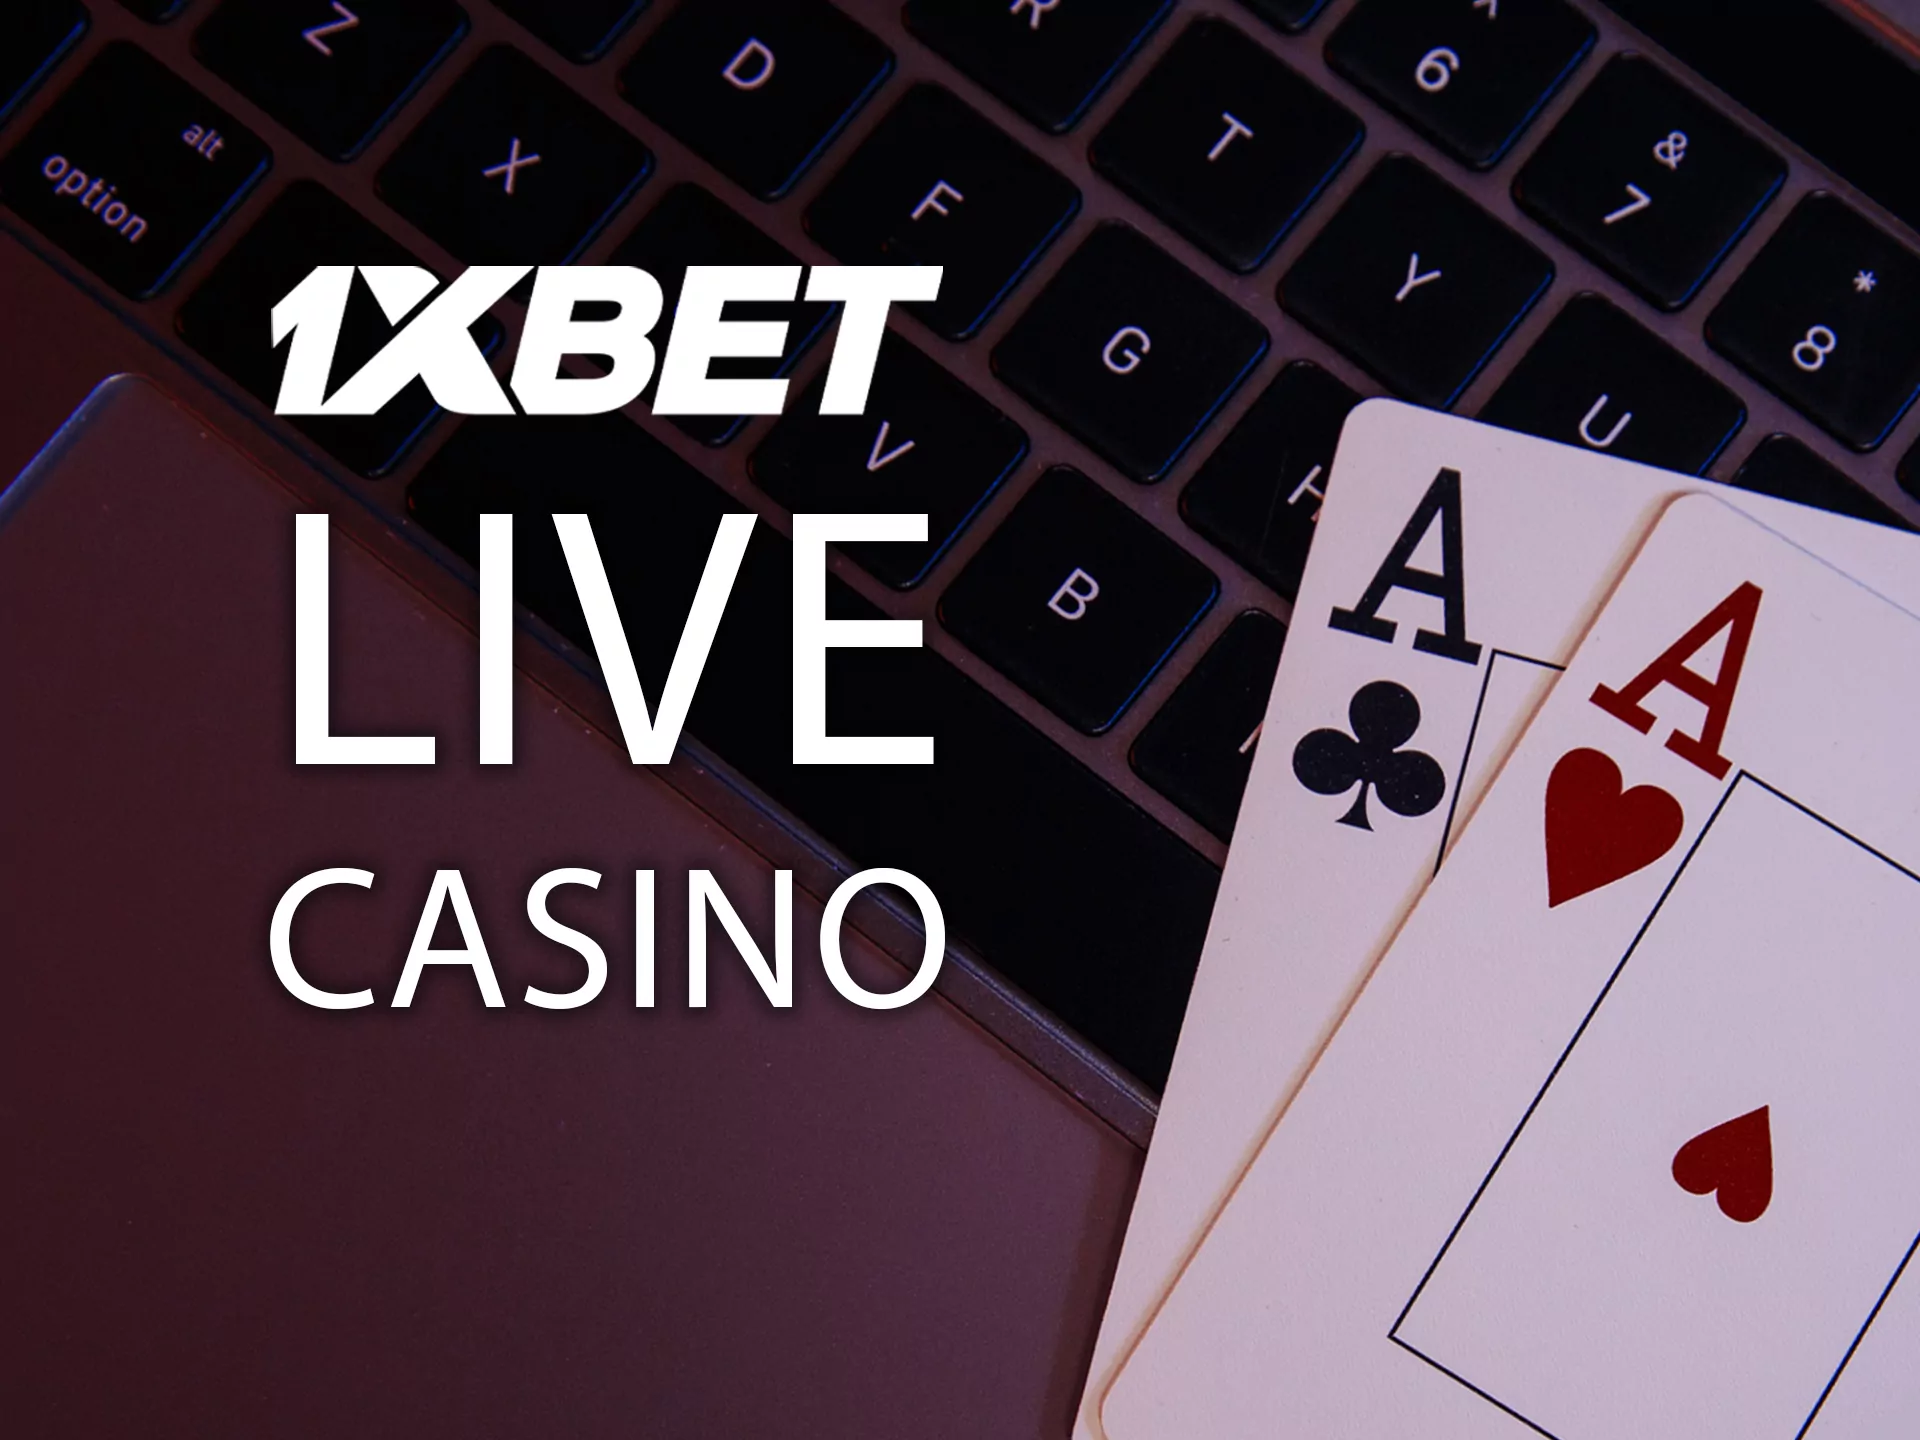 Gambling with live dealers is available for Indian users of 1xBet.